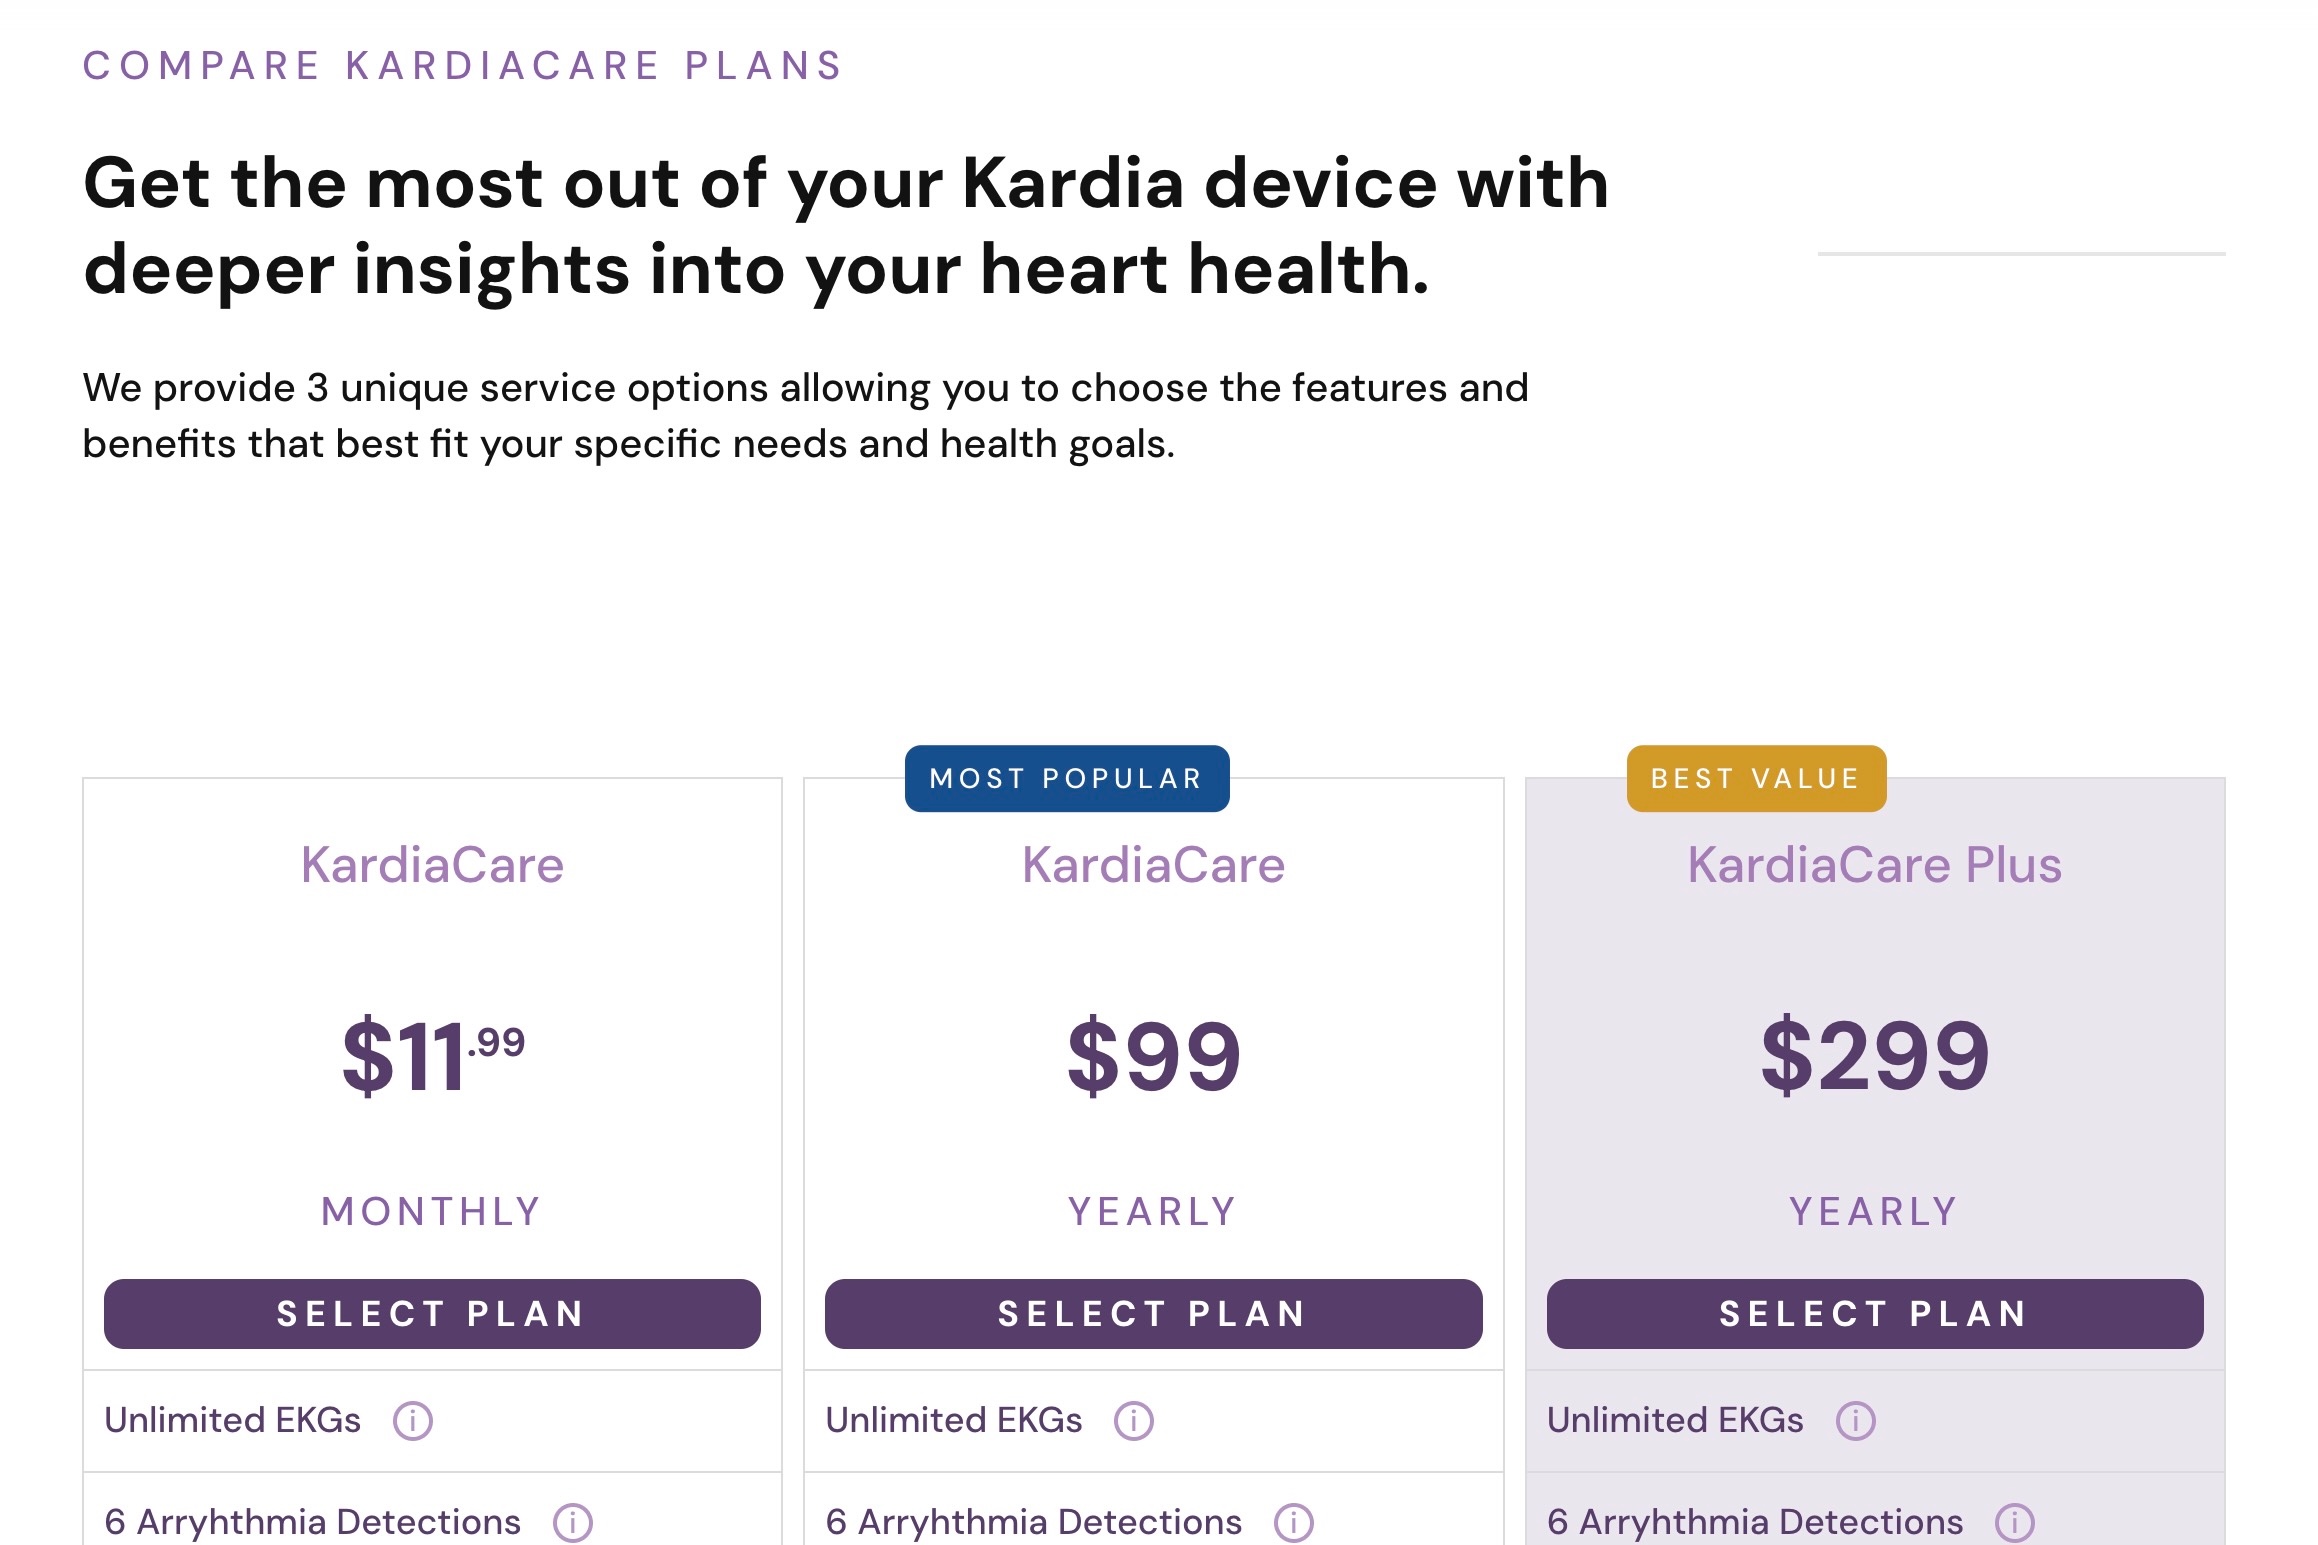 Screenshot showing the different KardiaCare packages and their costs.